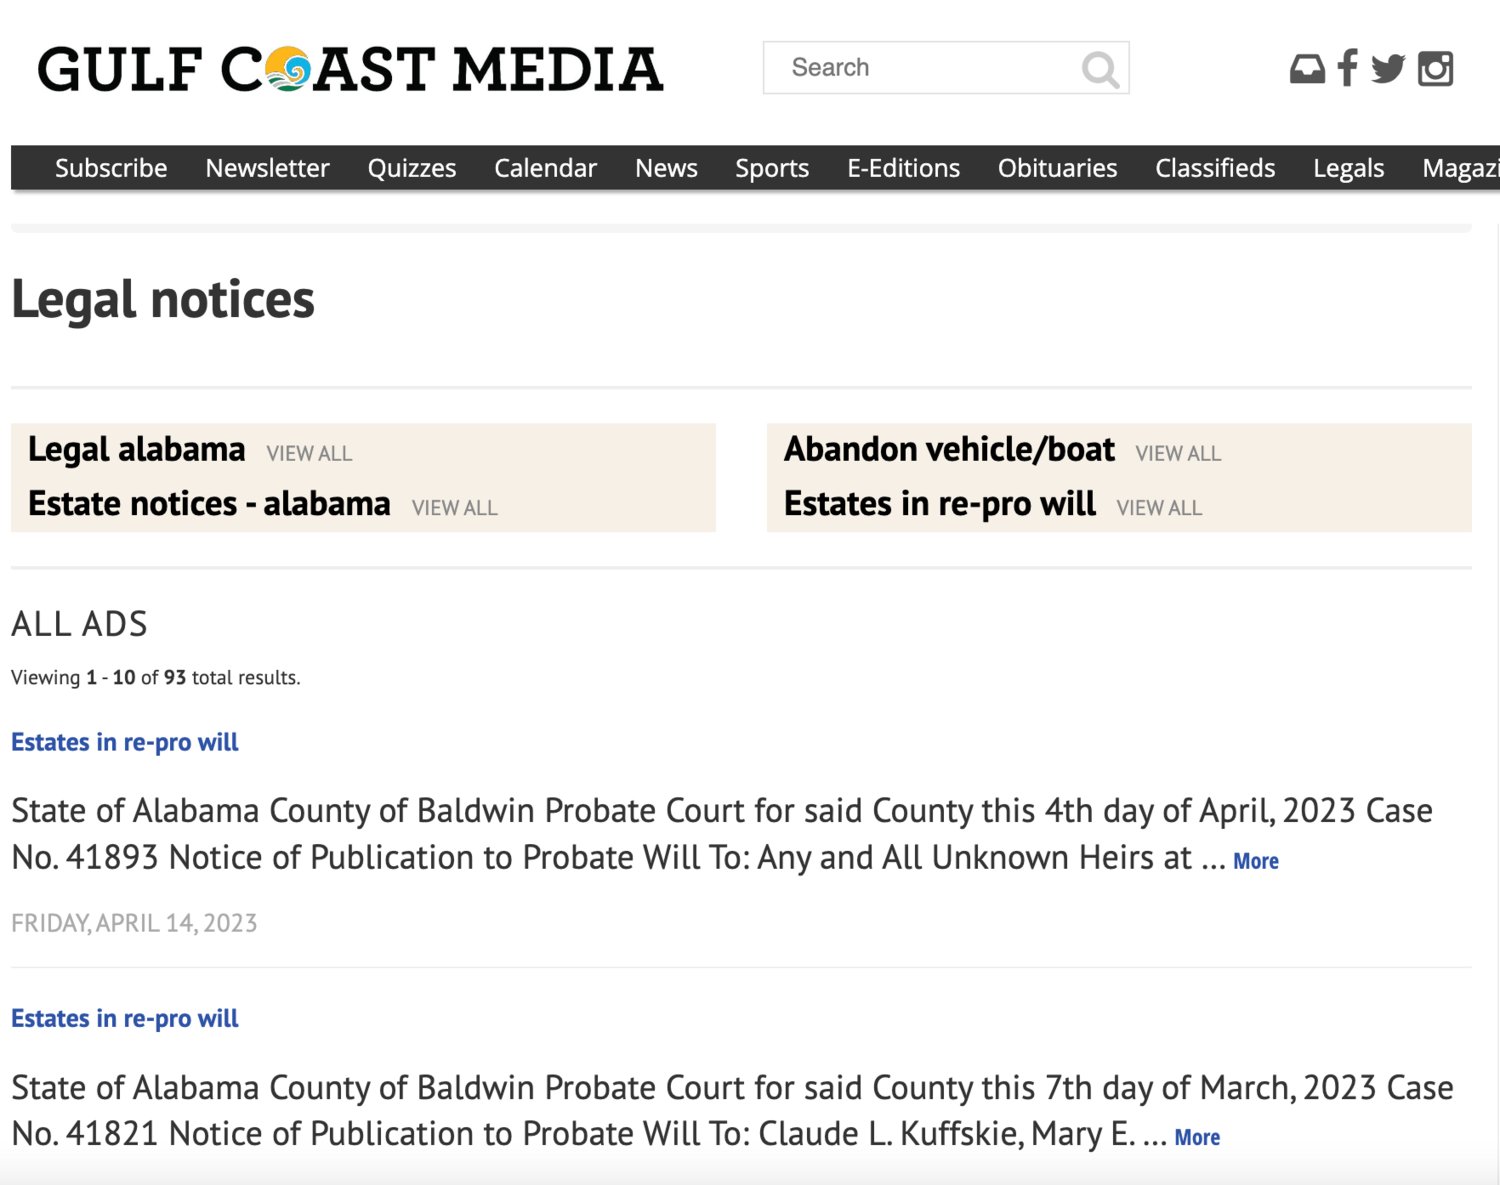 Public notices for Baldwin County are uploaded to GulfCoastMedia.com daily, providing the public an additional outlet to access the records, separated from government.